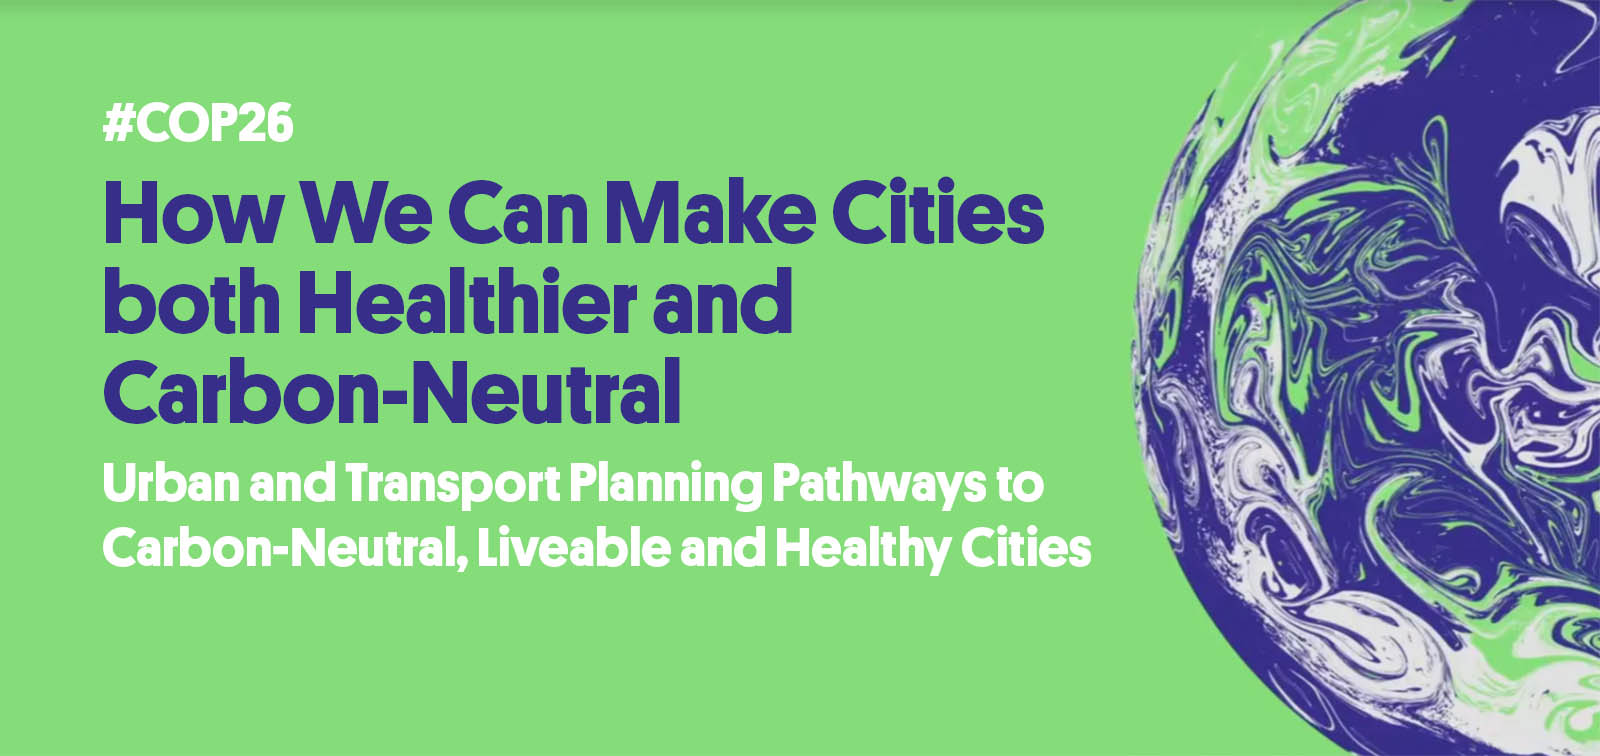 COP26: How we can make cities both healthier and carbon-neutral